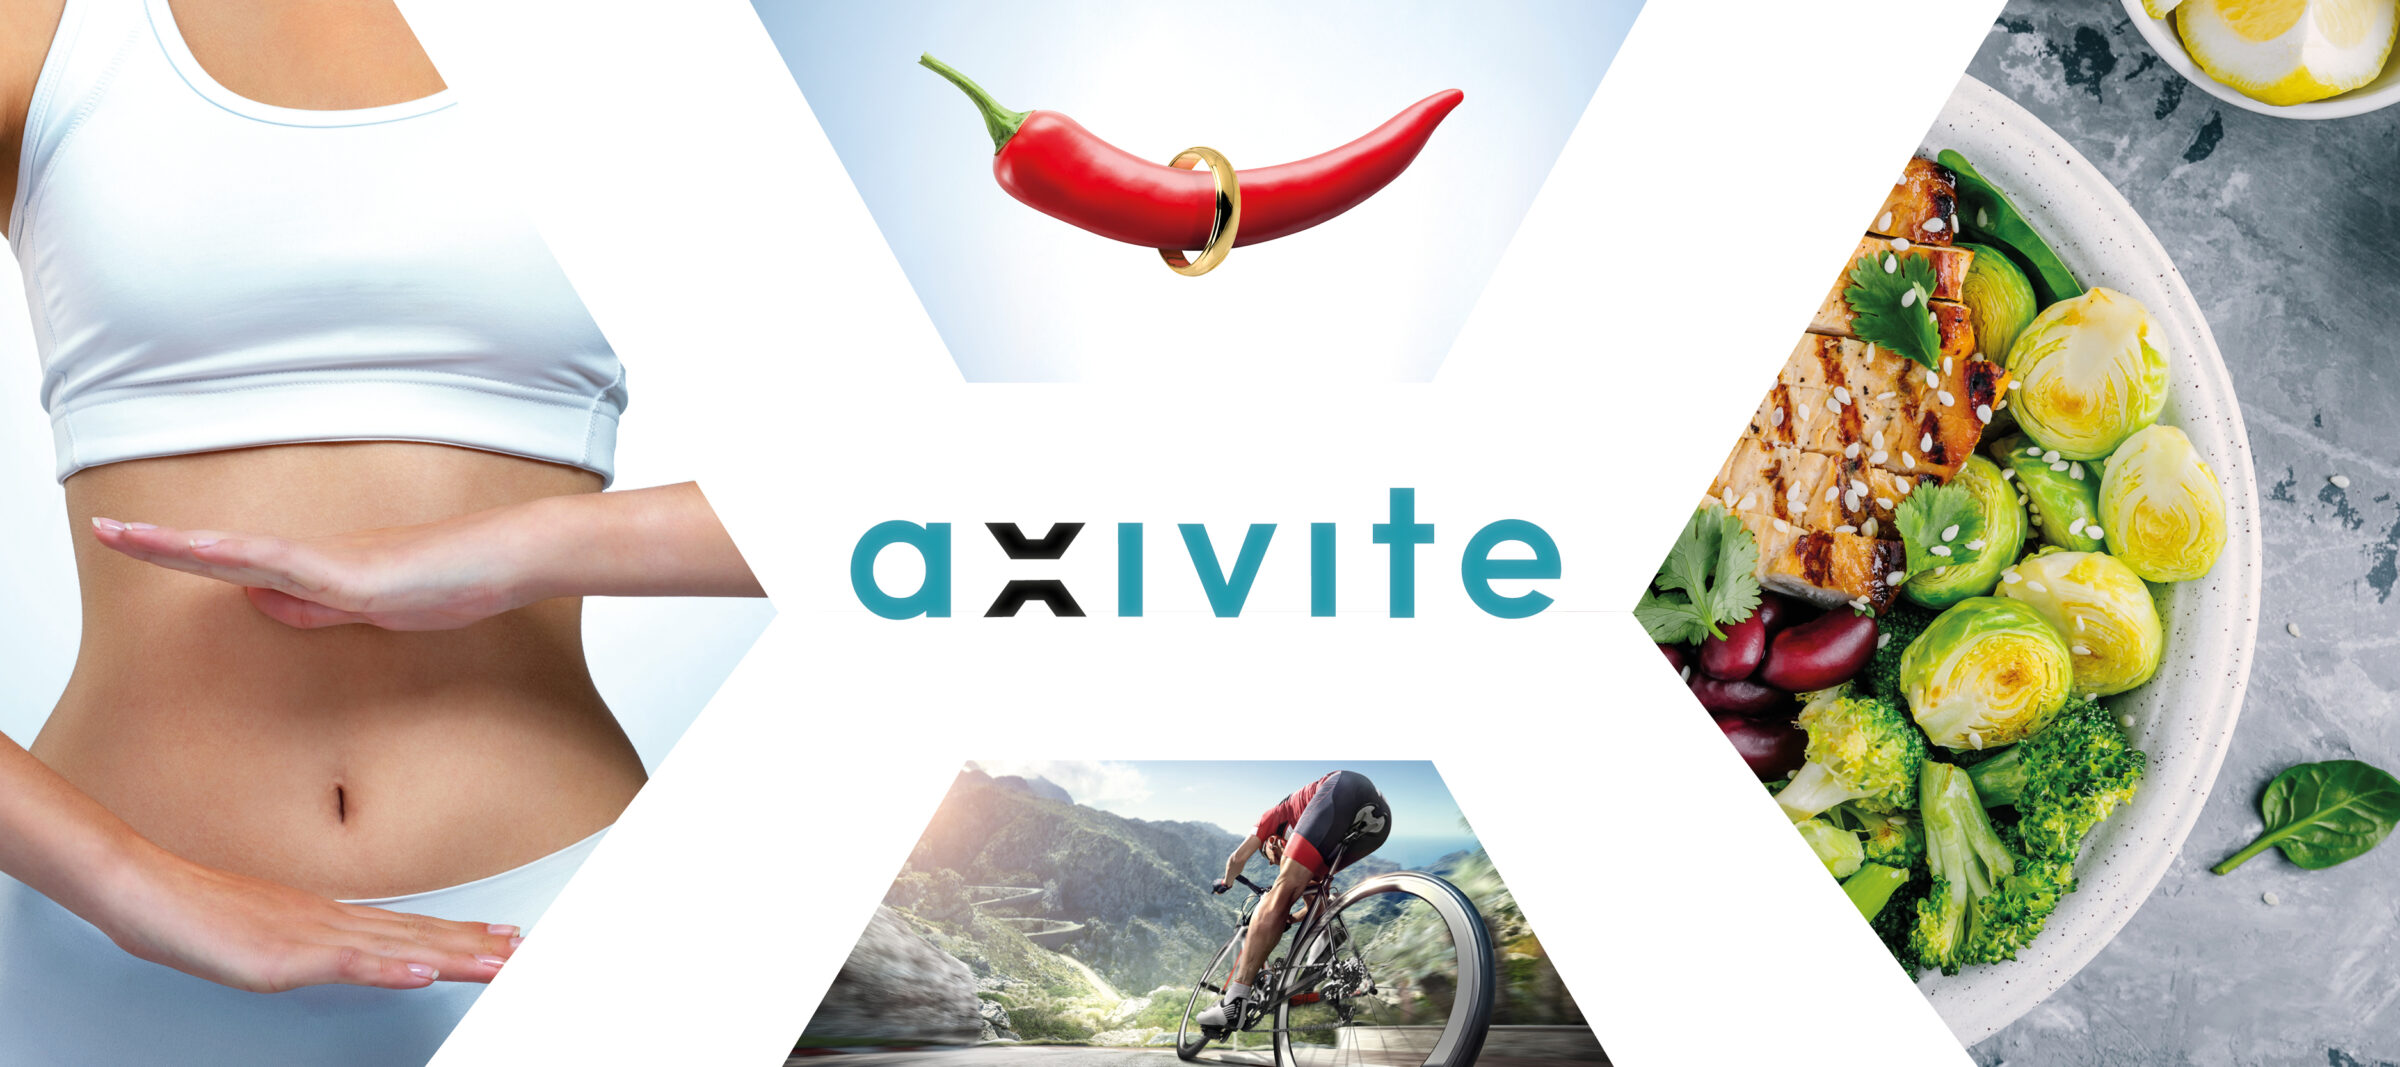 aXivite - brand category concept image header by adentity